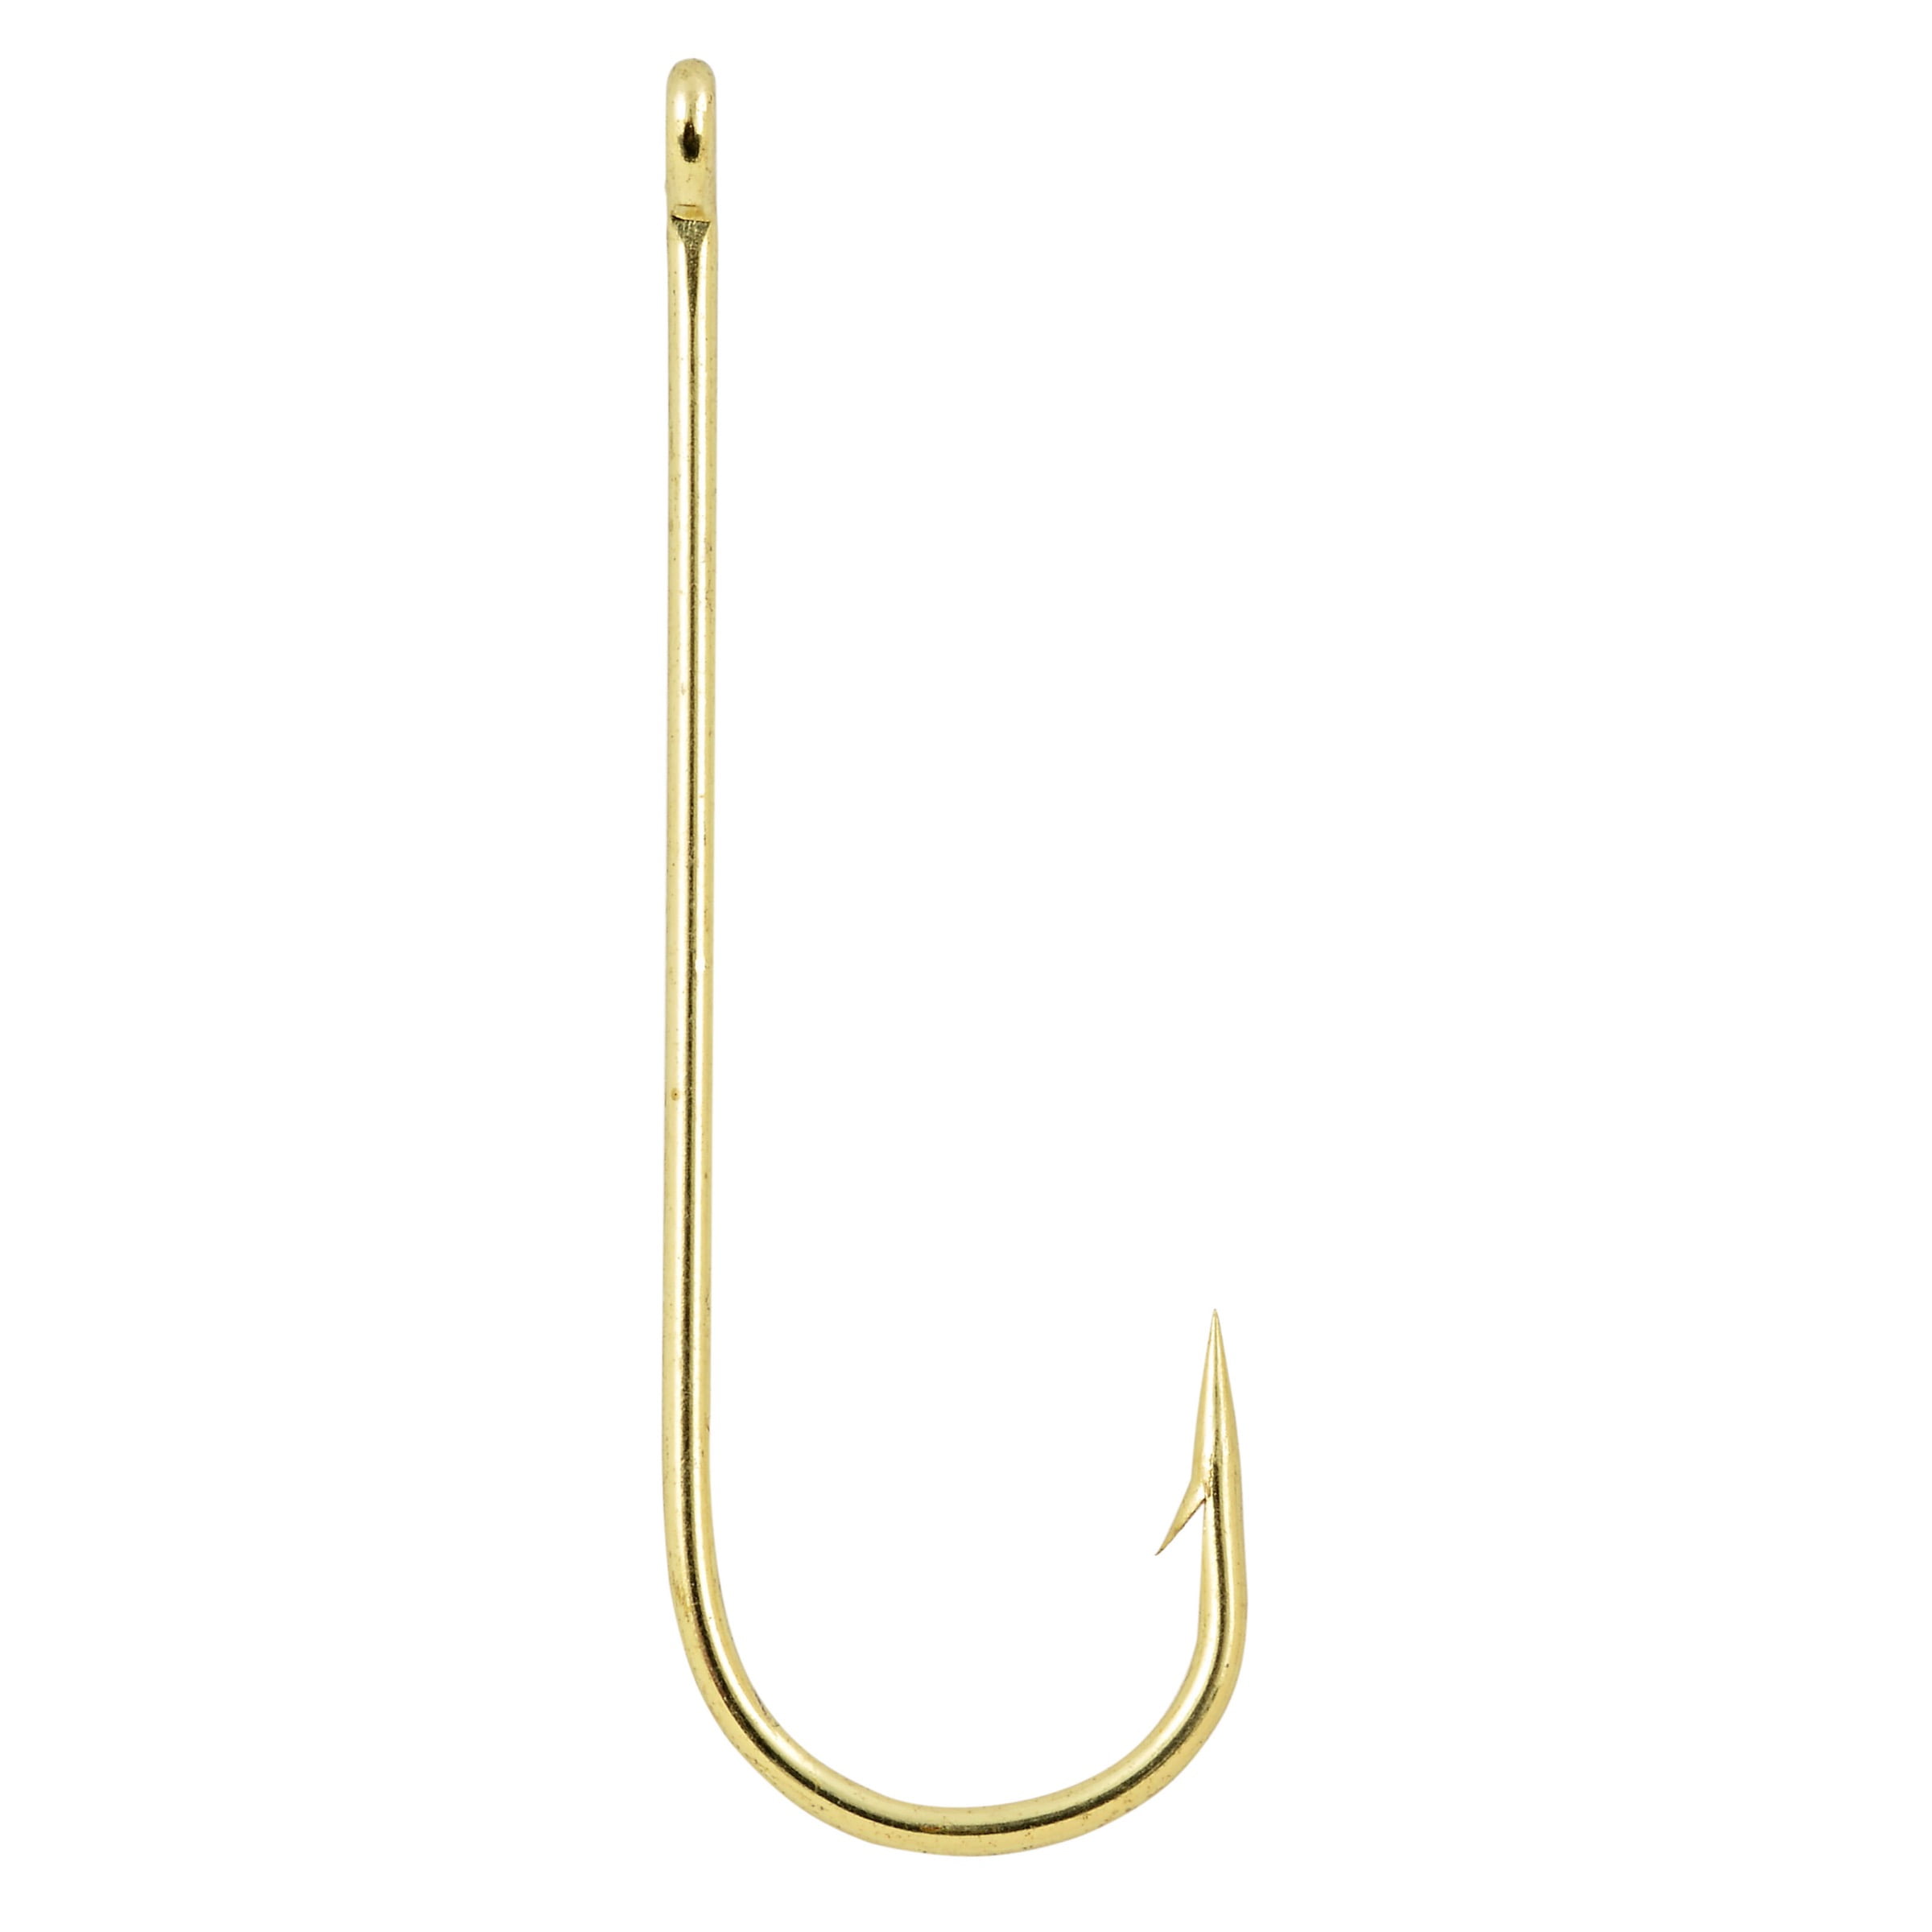 South Bend Aberdeen Fishing Hooks Terminal Tackle, Gold, Size 2, 10-pack